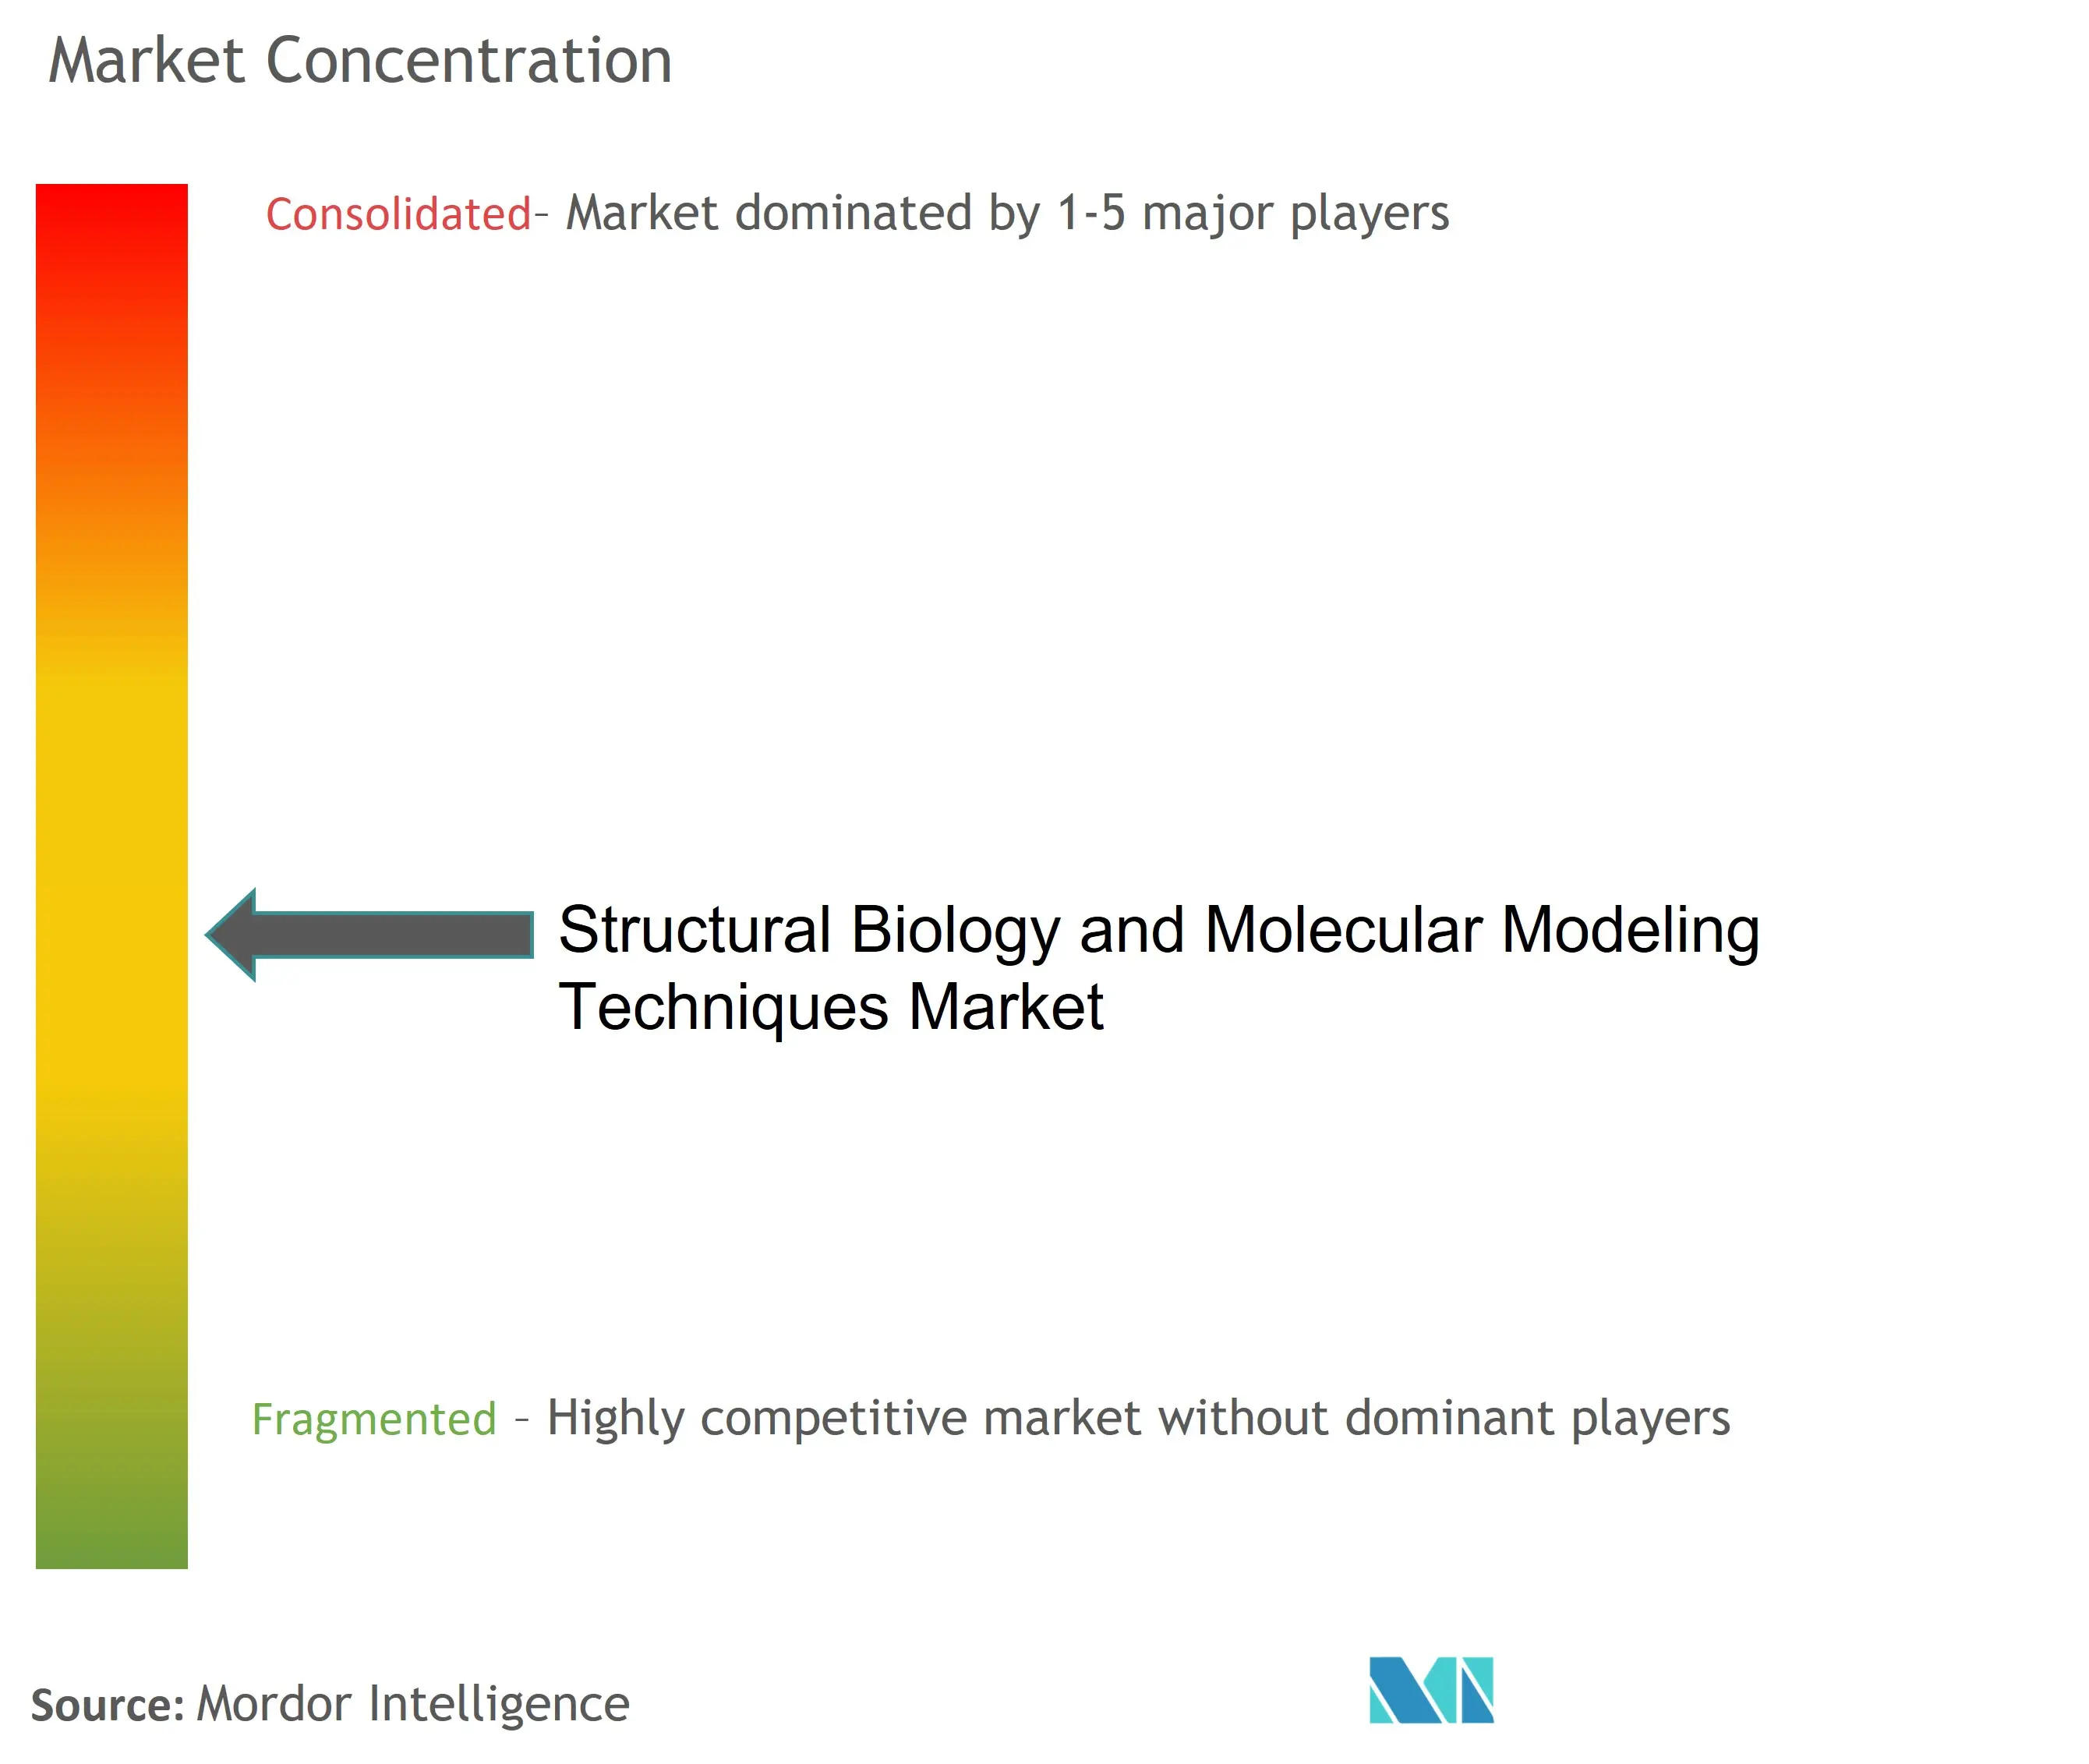 Structural Biology and Molecular Modeling Techniques Market Concentration